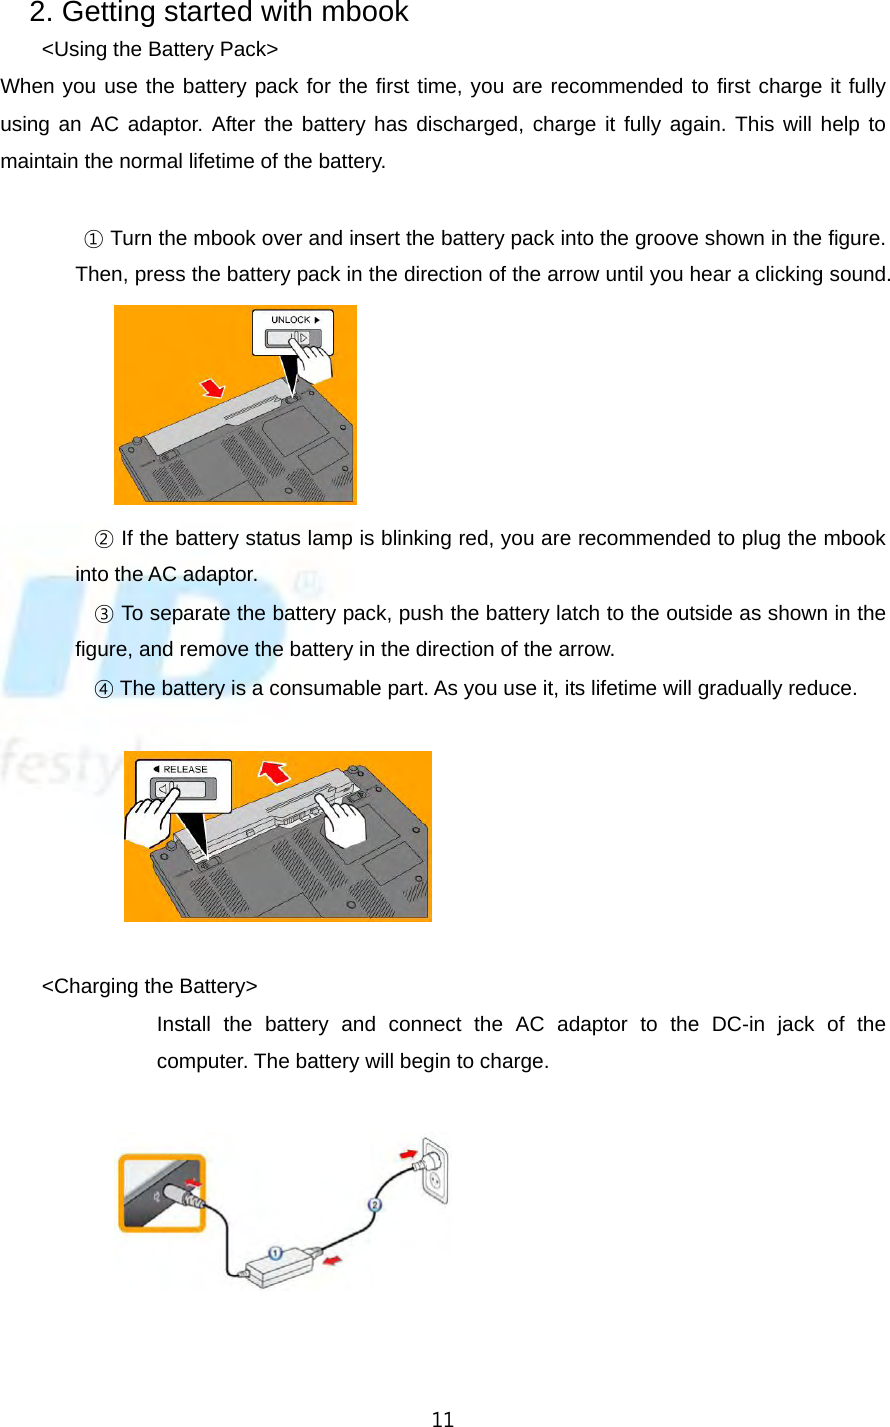   112. Getting started with mbook   &lt;Using the Battery Pack&gt; When you use the battery pack for the first time, you are recommended to first charge it fully using an AC adaptor. After the battery has discharged, charge it fully again. This will help to maintain the normal lifetime of the battery.                   ① Turn the mbook over and insert the battery pack into the groove shown in the figure. Then, press the battery pack in the direction of the arrow until you hear a clicking sound.                       ② If the battery status lamp is blinking red, you are recommended to plug the mbook into the AC adaptor.          ③ To separate the battery pack, push the battery latch to the outside as shown in the figure, and remove the battery in the direction of the arrow.          ④ The battery is a consumable part. As you use it, its lifetime will gradually reduce.                             &lt;Charging the Battery&gt; Install the battery and connect the AC adaptor to the DC-in jack of the computer. The battery will begin to charge.                           